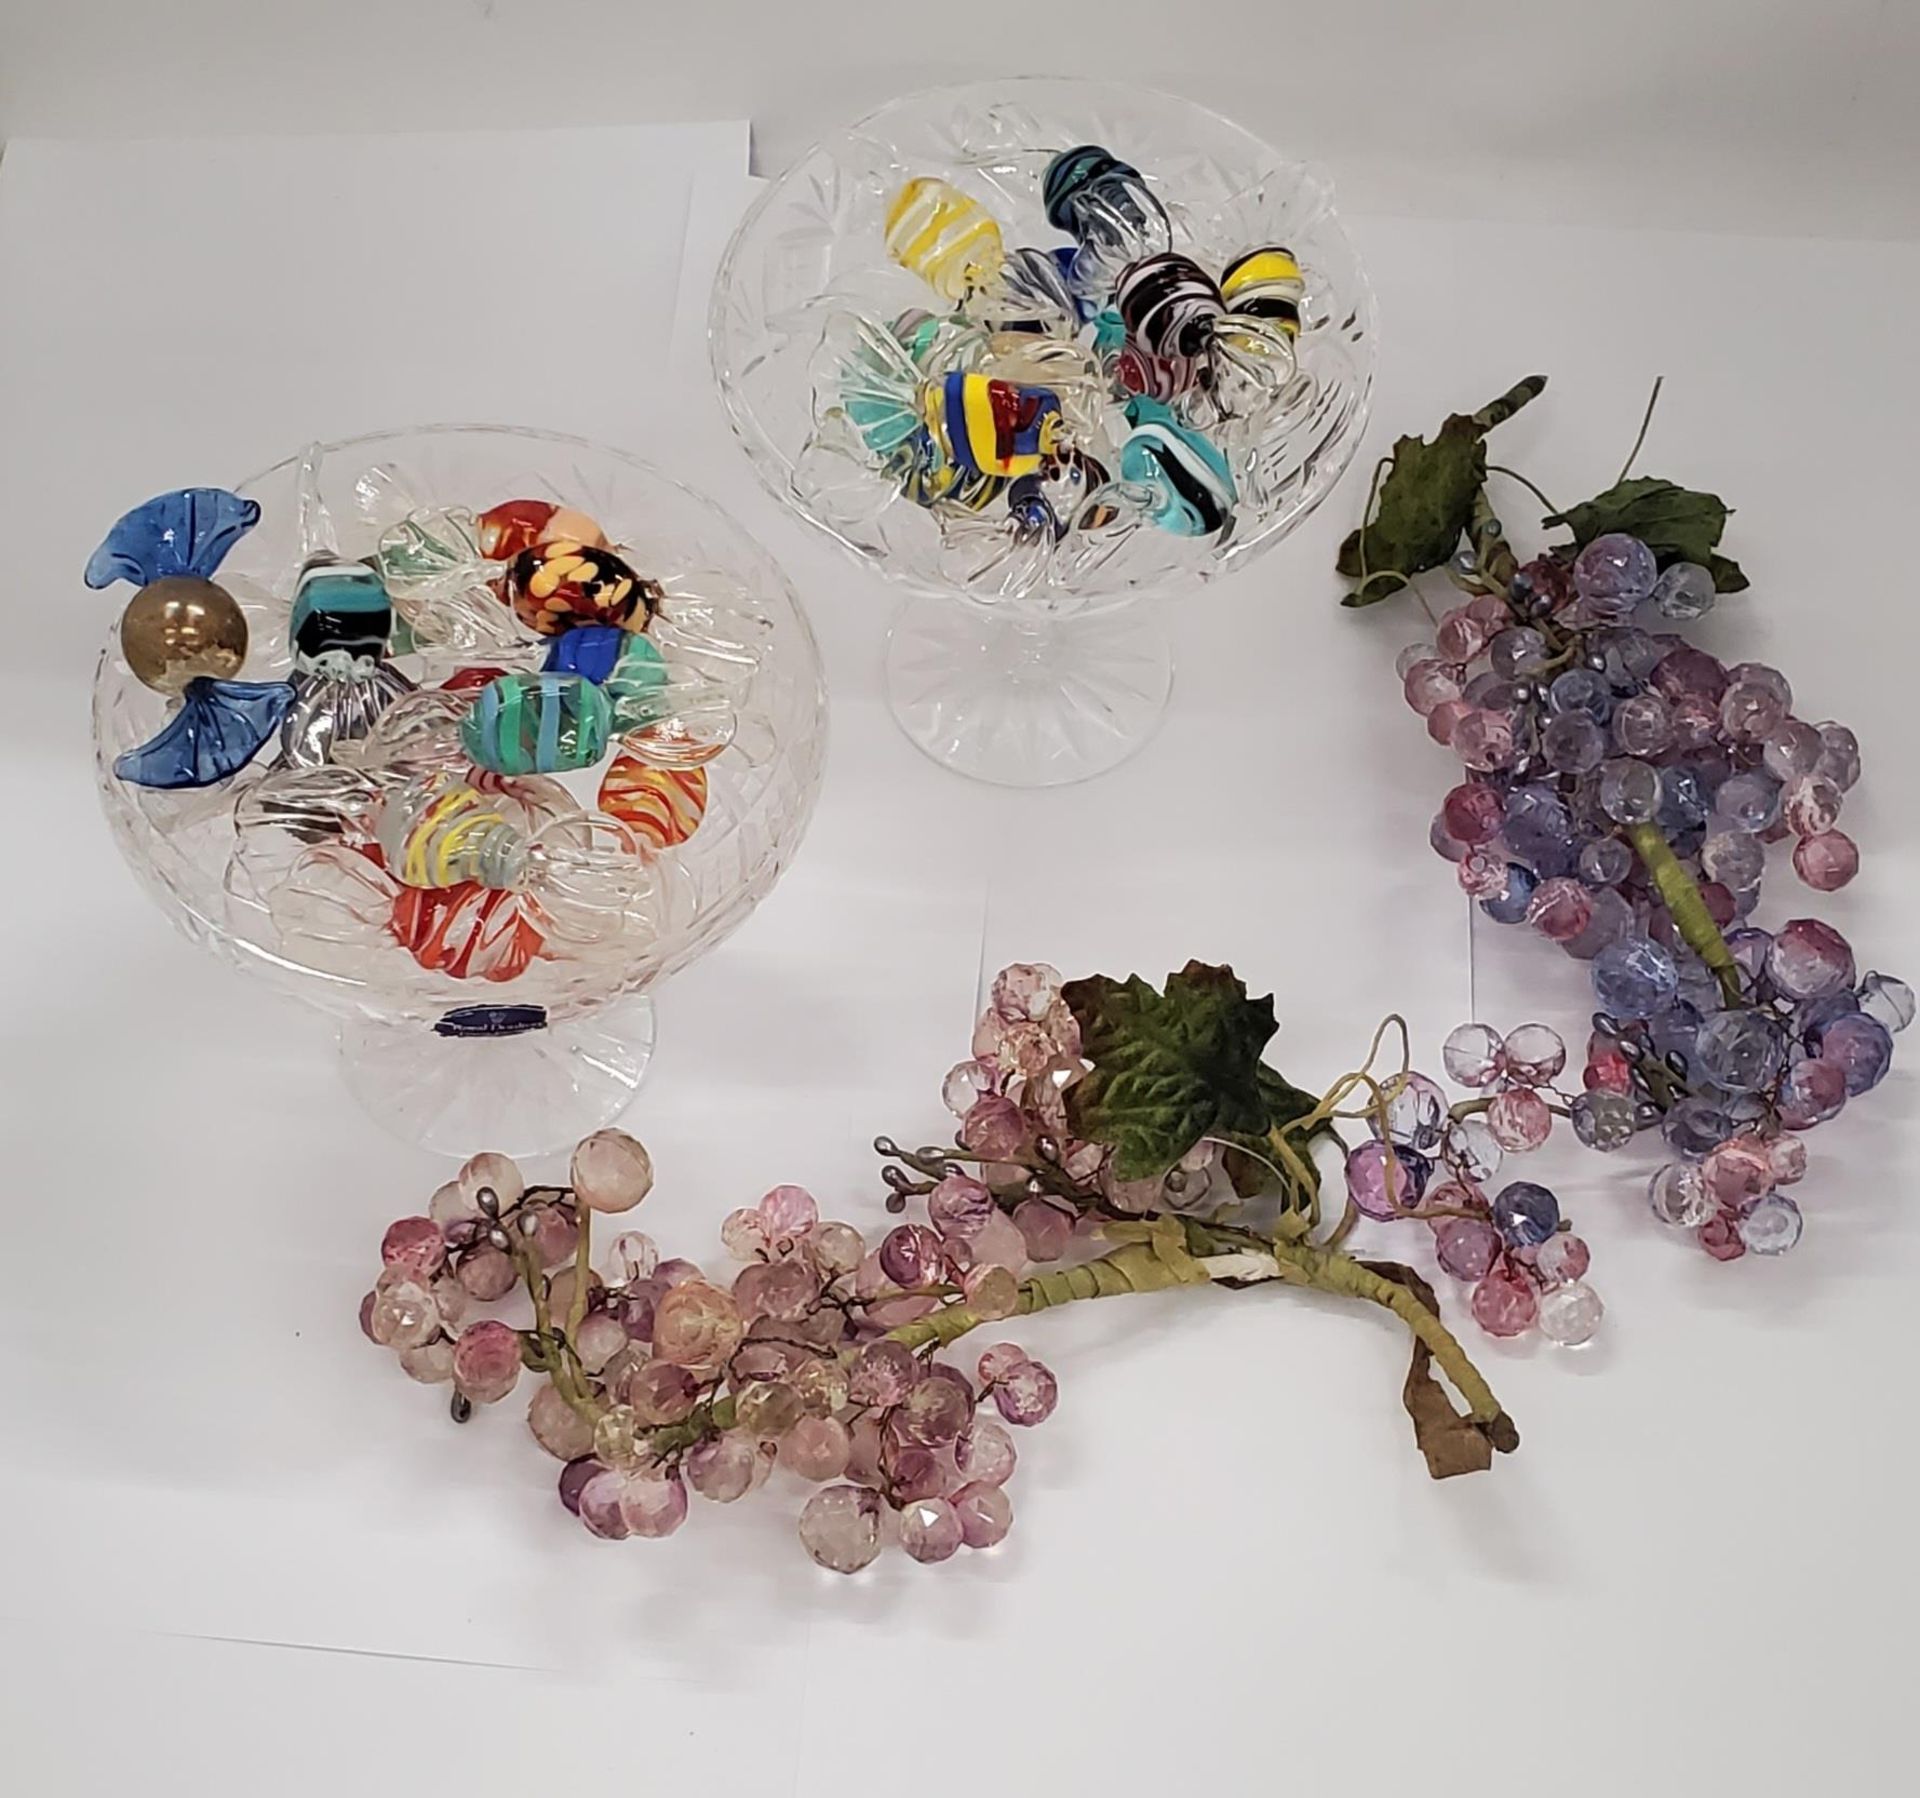 A QUANTITY OF MURANO STYLE GLASS SWEETS - APPROX 27, TWO ROYAL DOULTON FOOTED BOWLS PLUS